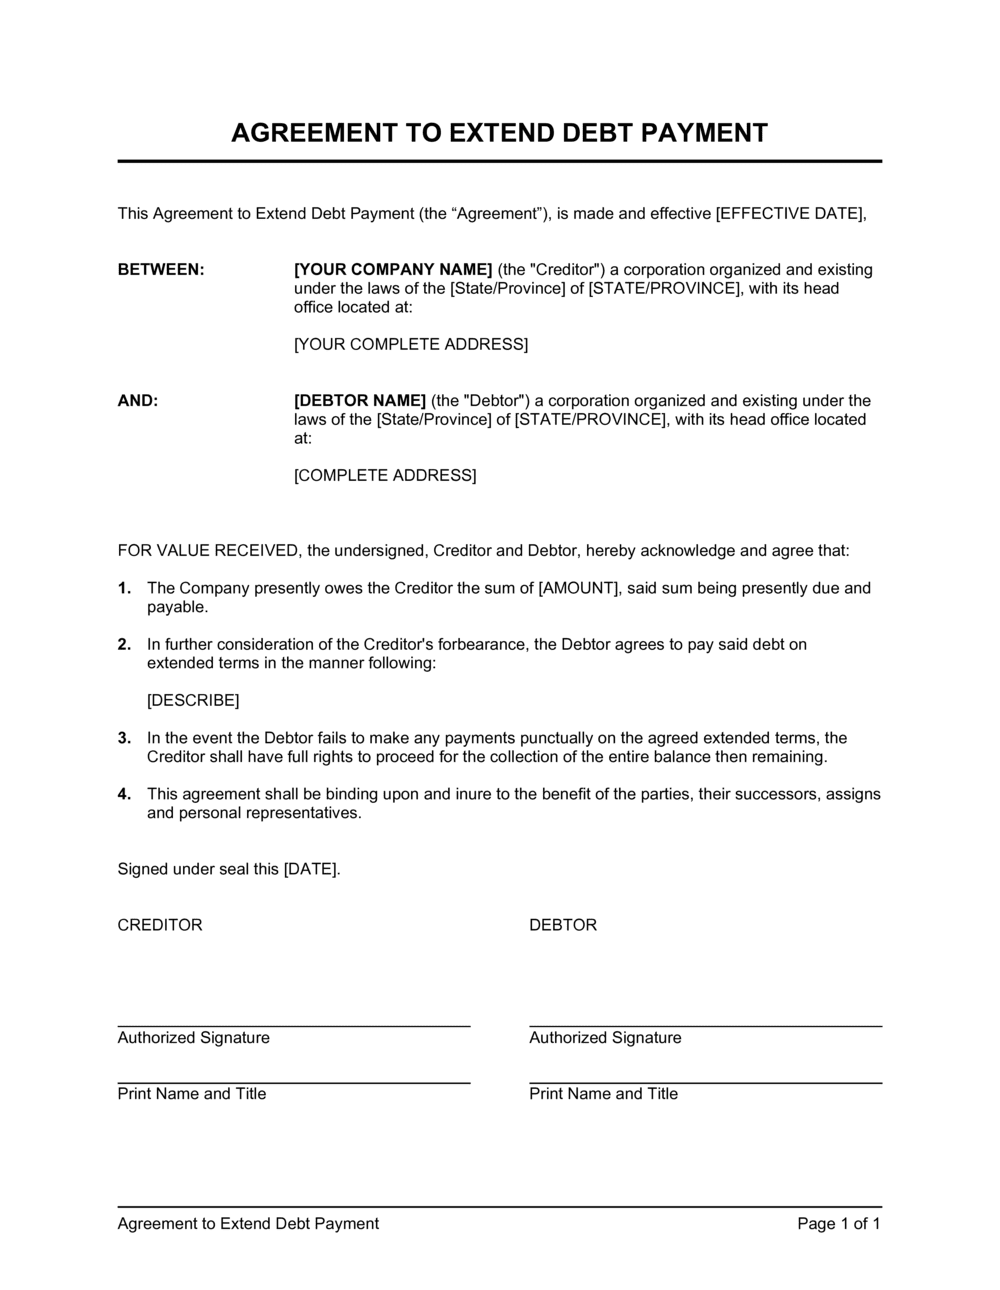 Agreement to Extend Debt Payment Template  by Business-in-a-Box™ Intended For installment payment agreement template free